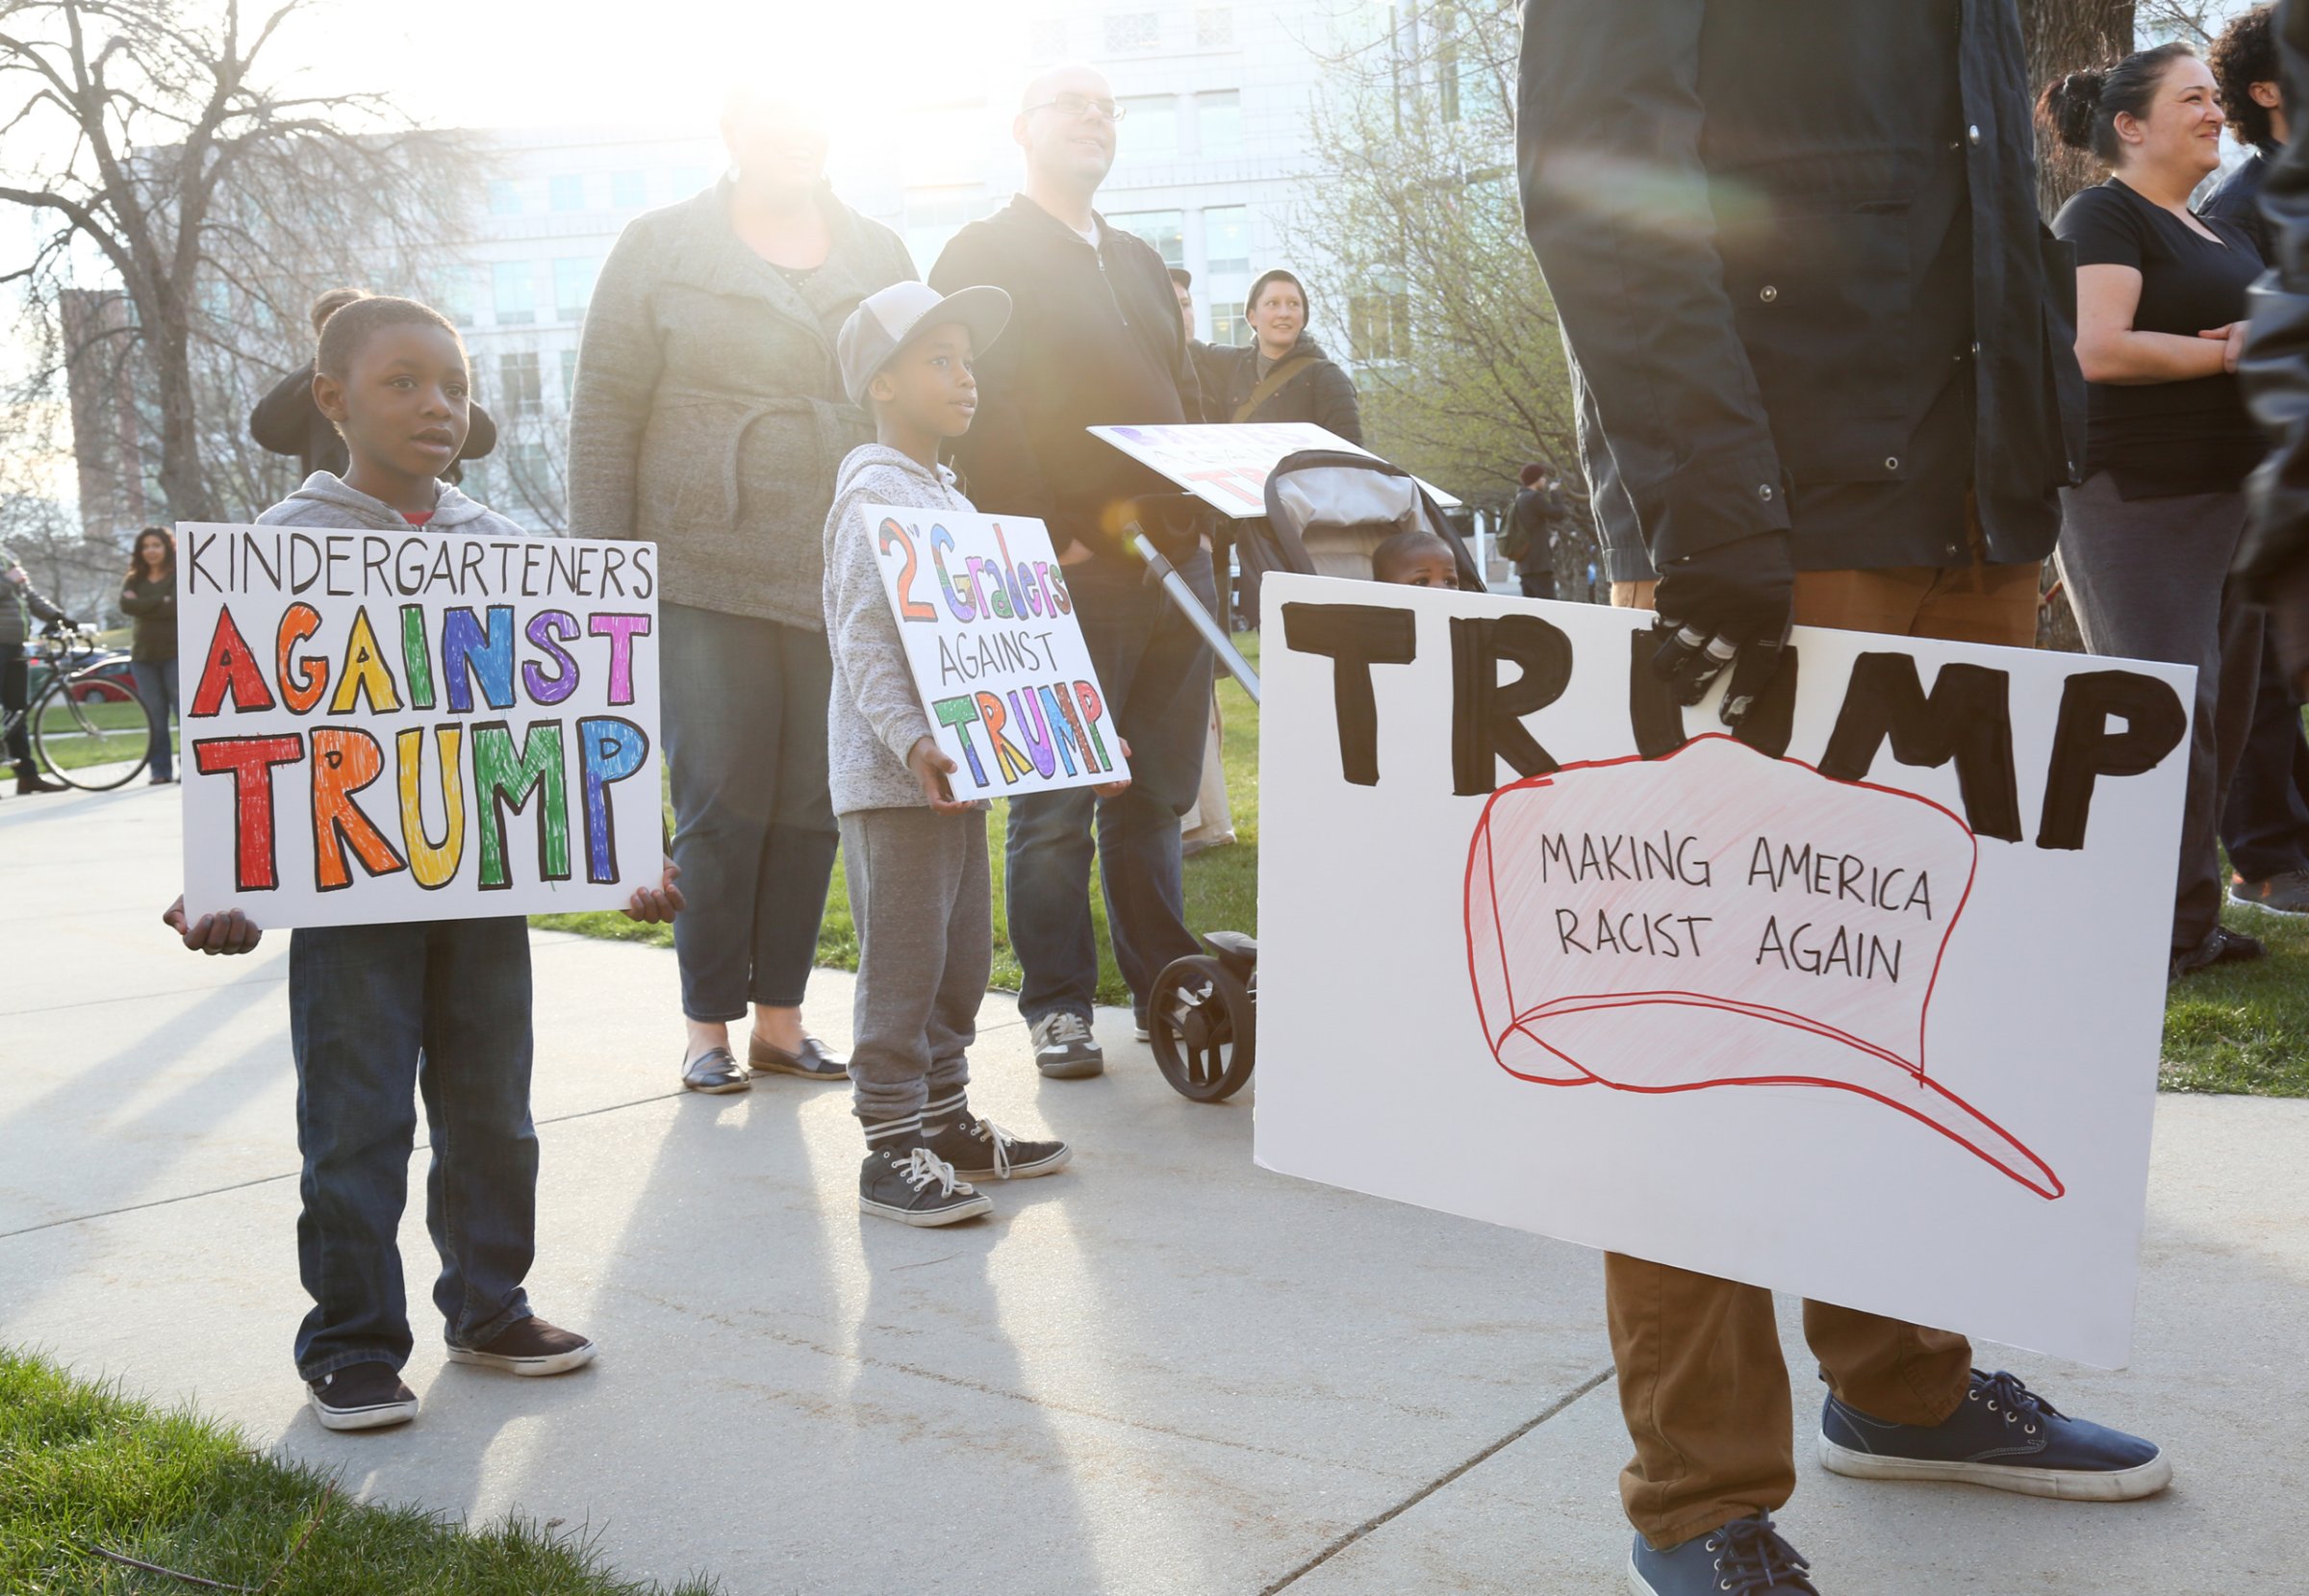 Brothers Noah, left and Owen Burket hold signs as they protest with their family at a rally outside the Infinity Events Center in Salt Lake City, where Republican Presidential candidate Donald Trump held a campaign rally on March 18, 2016.